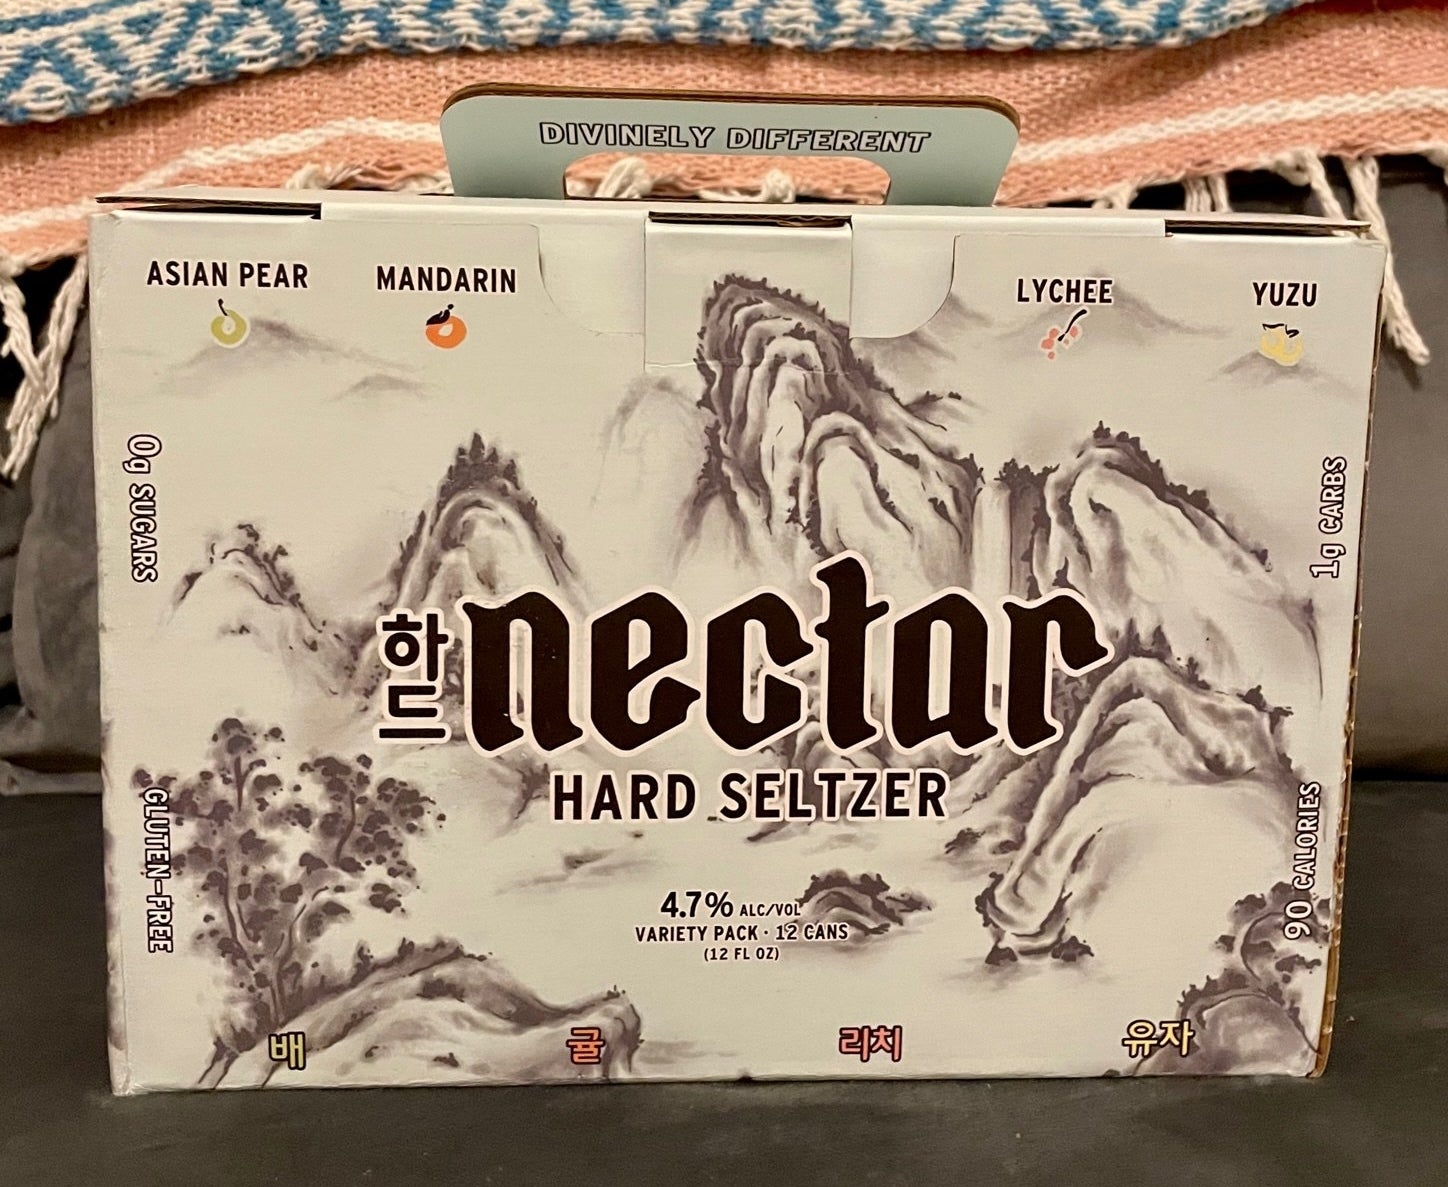 A photo of the variety pack box